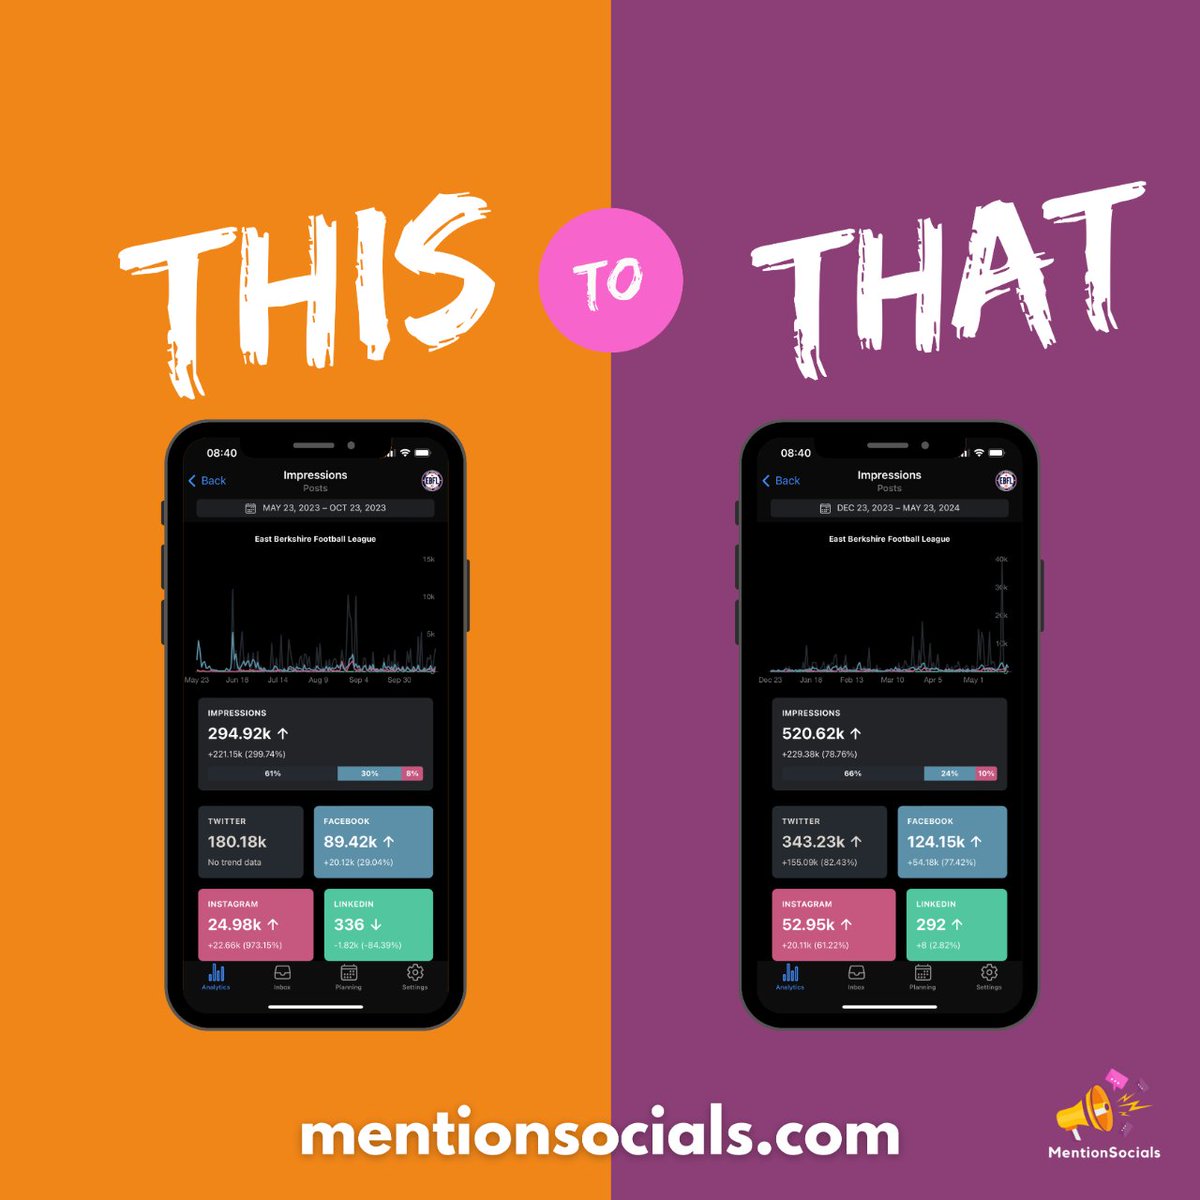 Are you after similar results for your business? ✅ Get your business noticed today with multi-award-winning social media management from @MentionSocials! mentionsocials.com @EastBerkshireFL  #socialmediamanagement #socialmediamarketing #marketingforyou